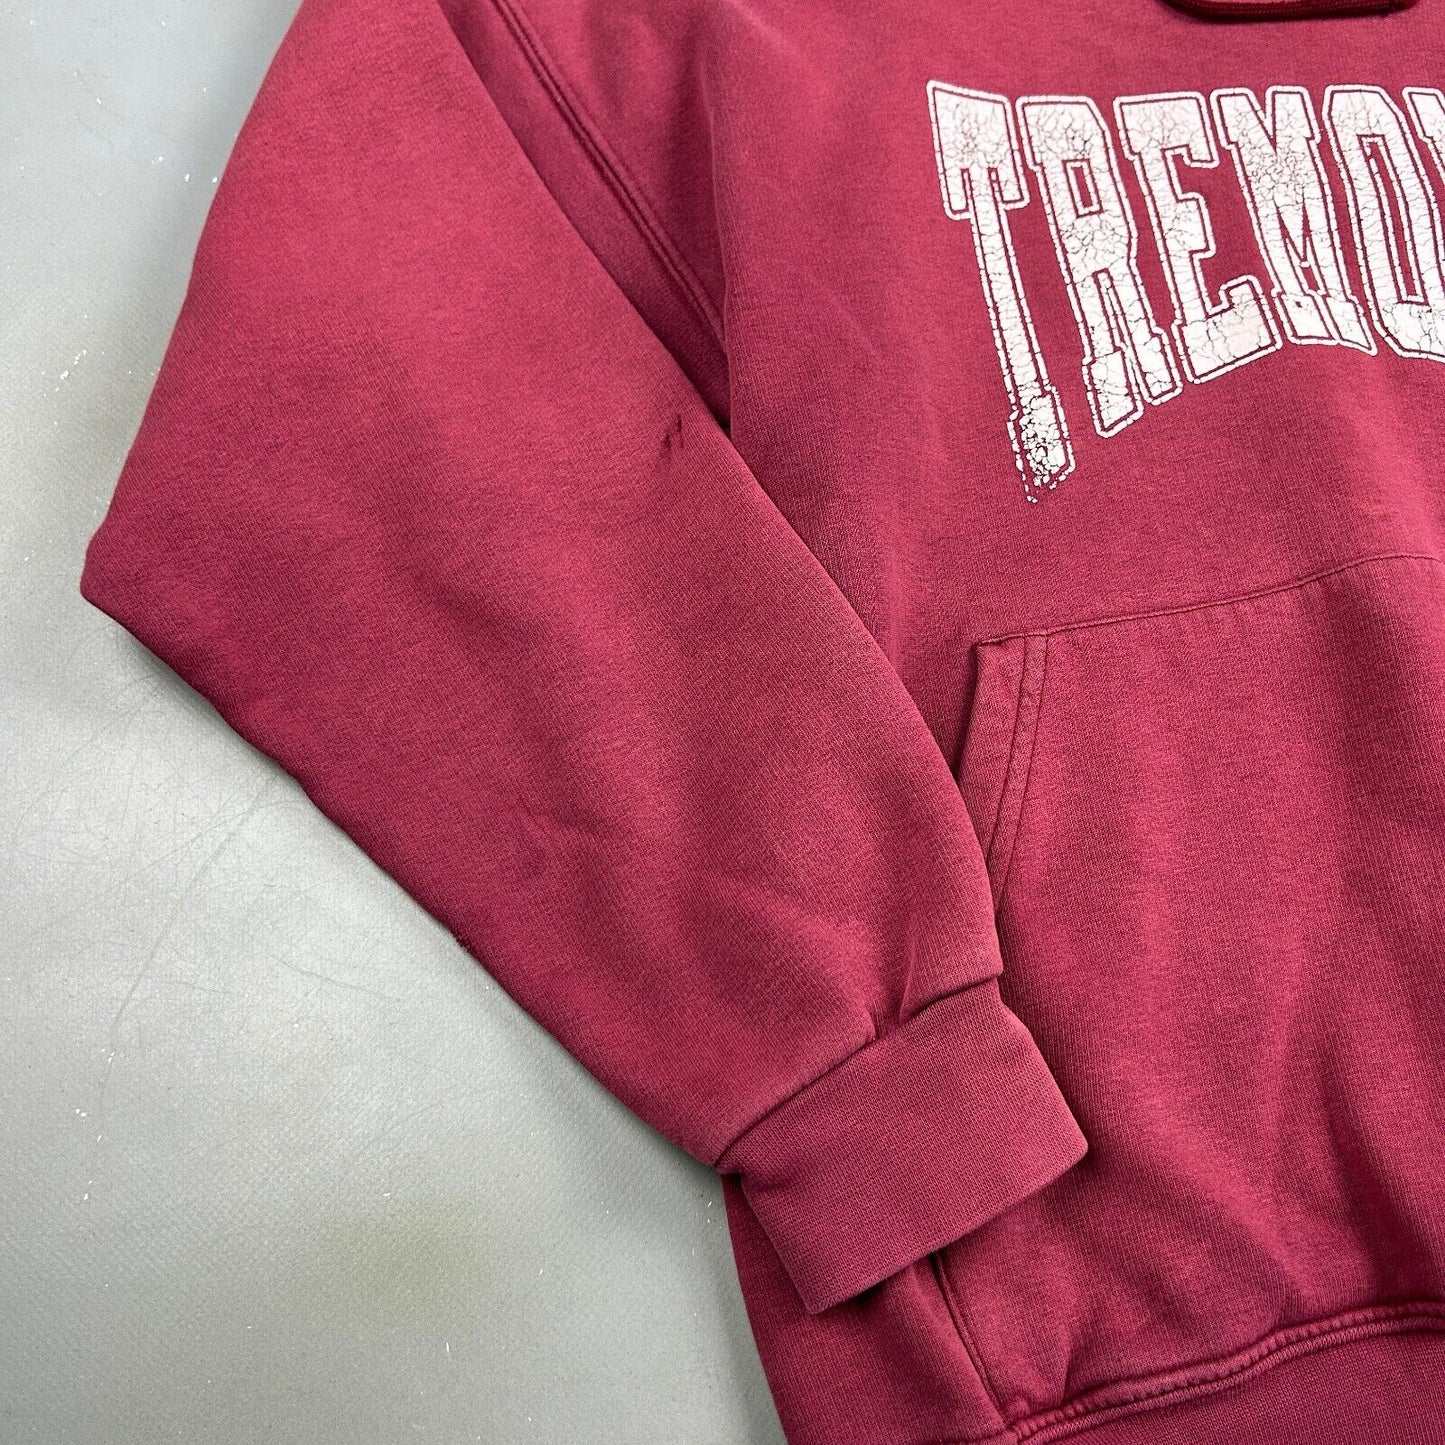 VINTAGE 90s Tremont Faded Red Hoodie Sweater sz Large Mens